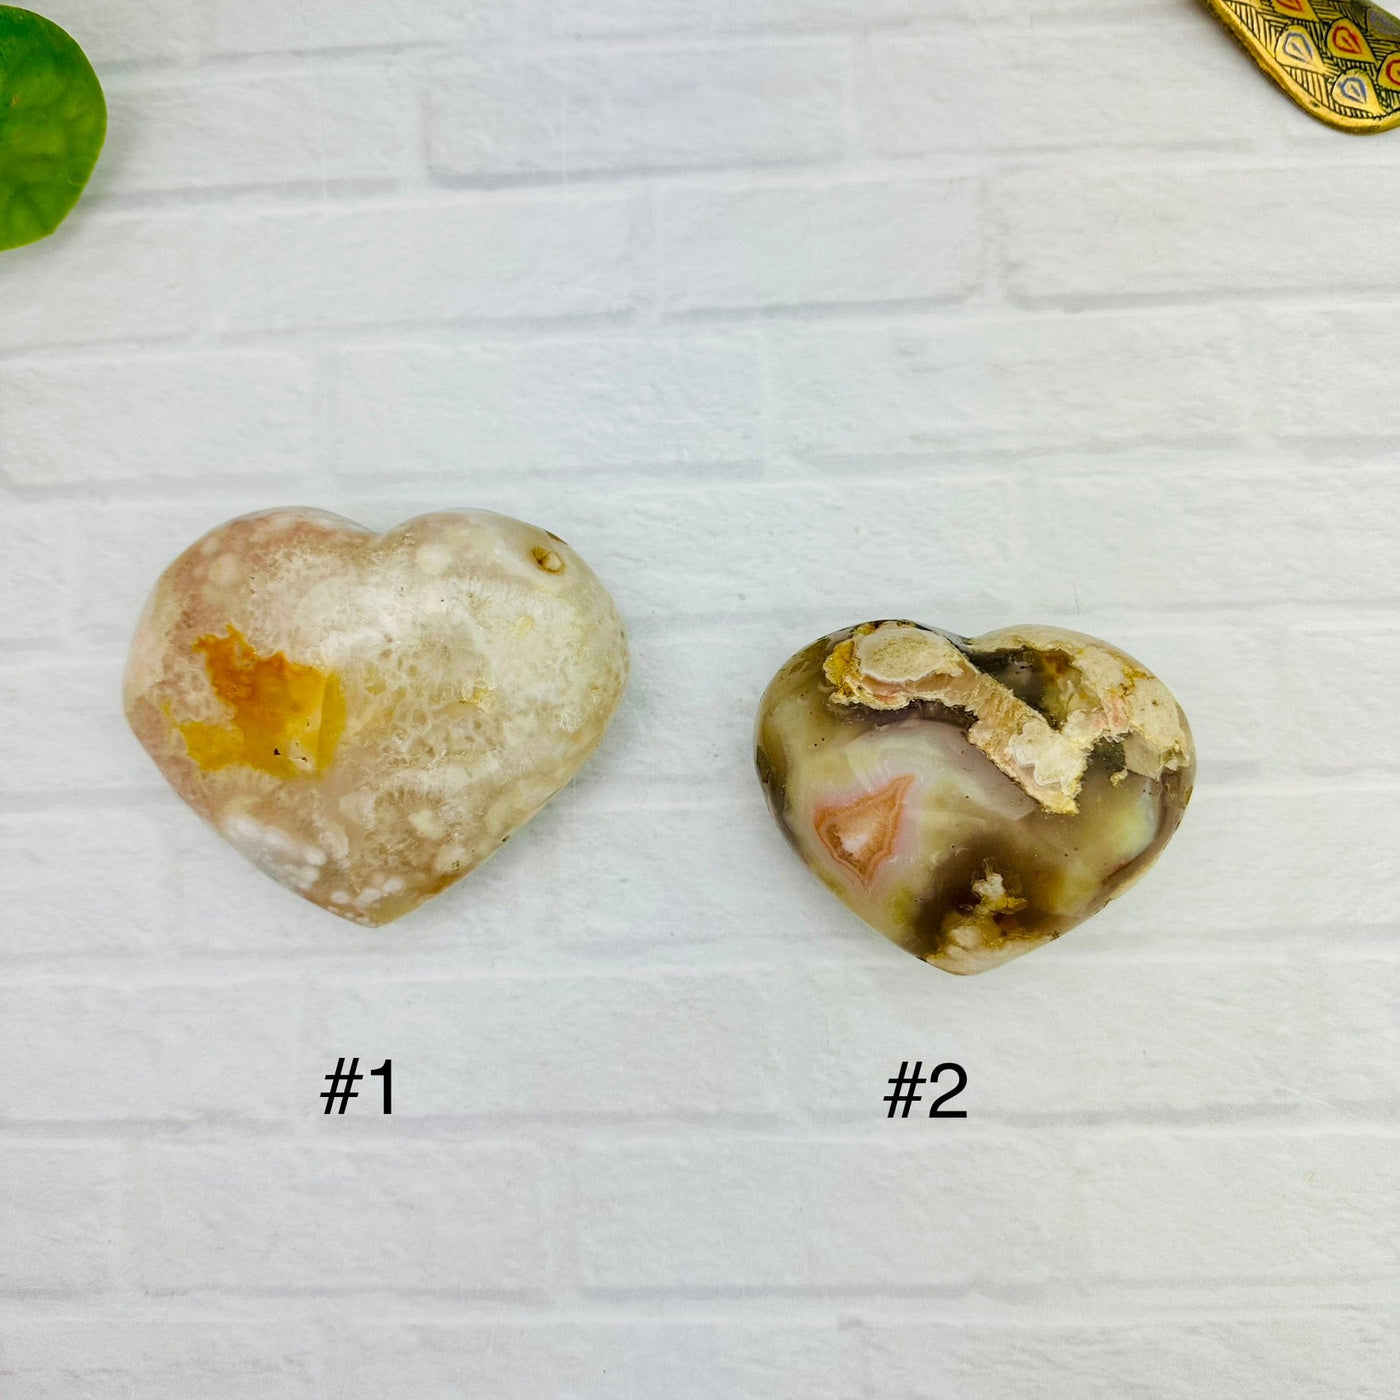 Polished Flower Agate Heart - You Choose - top view of both choices